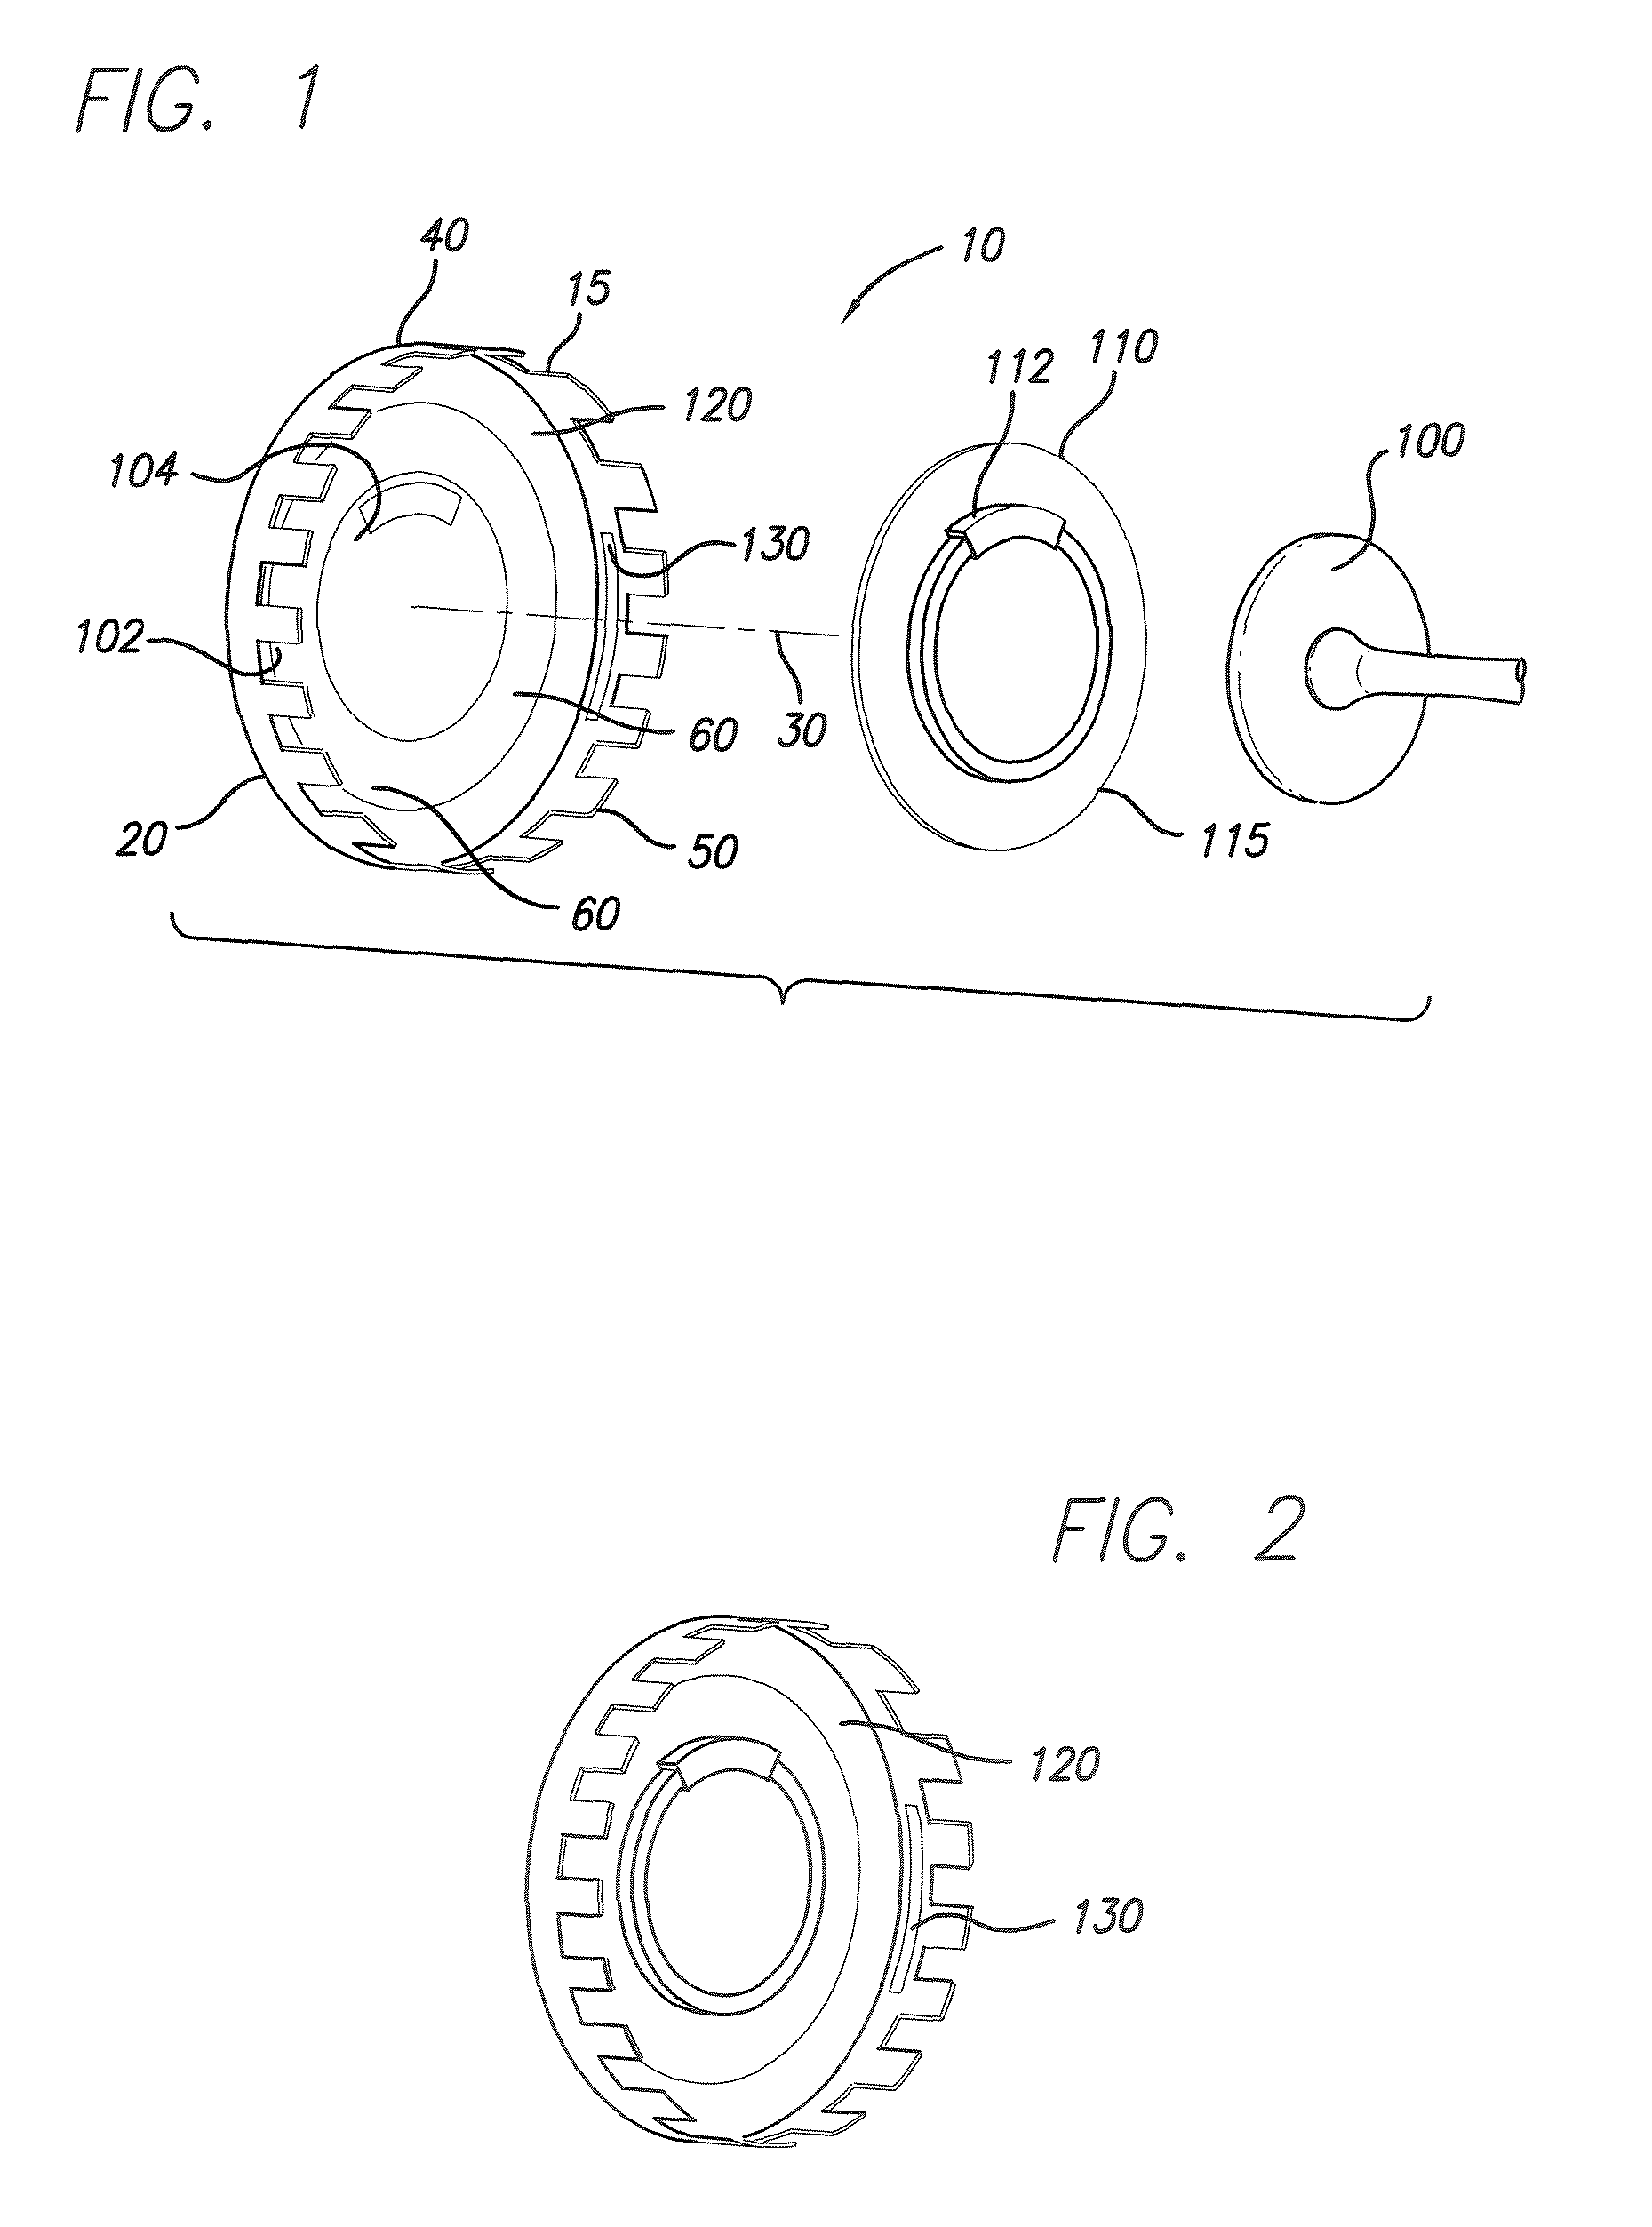 Radio frequency verification system and device